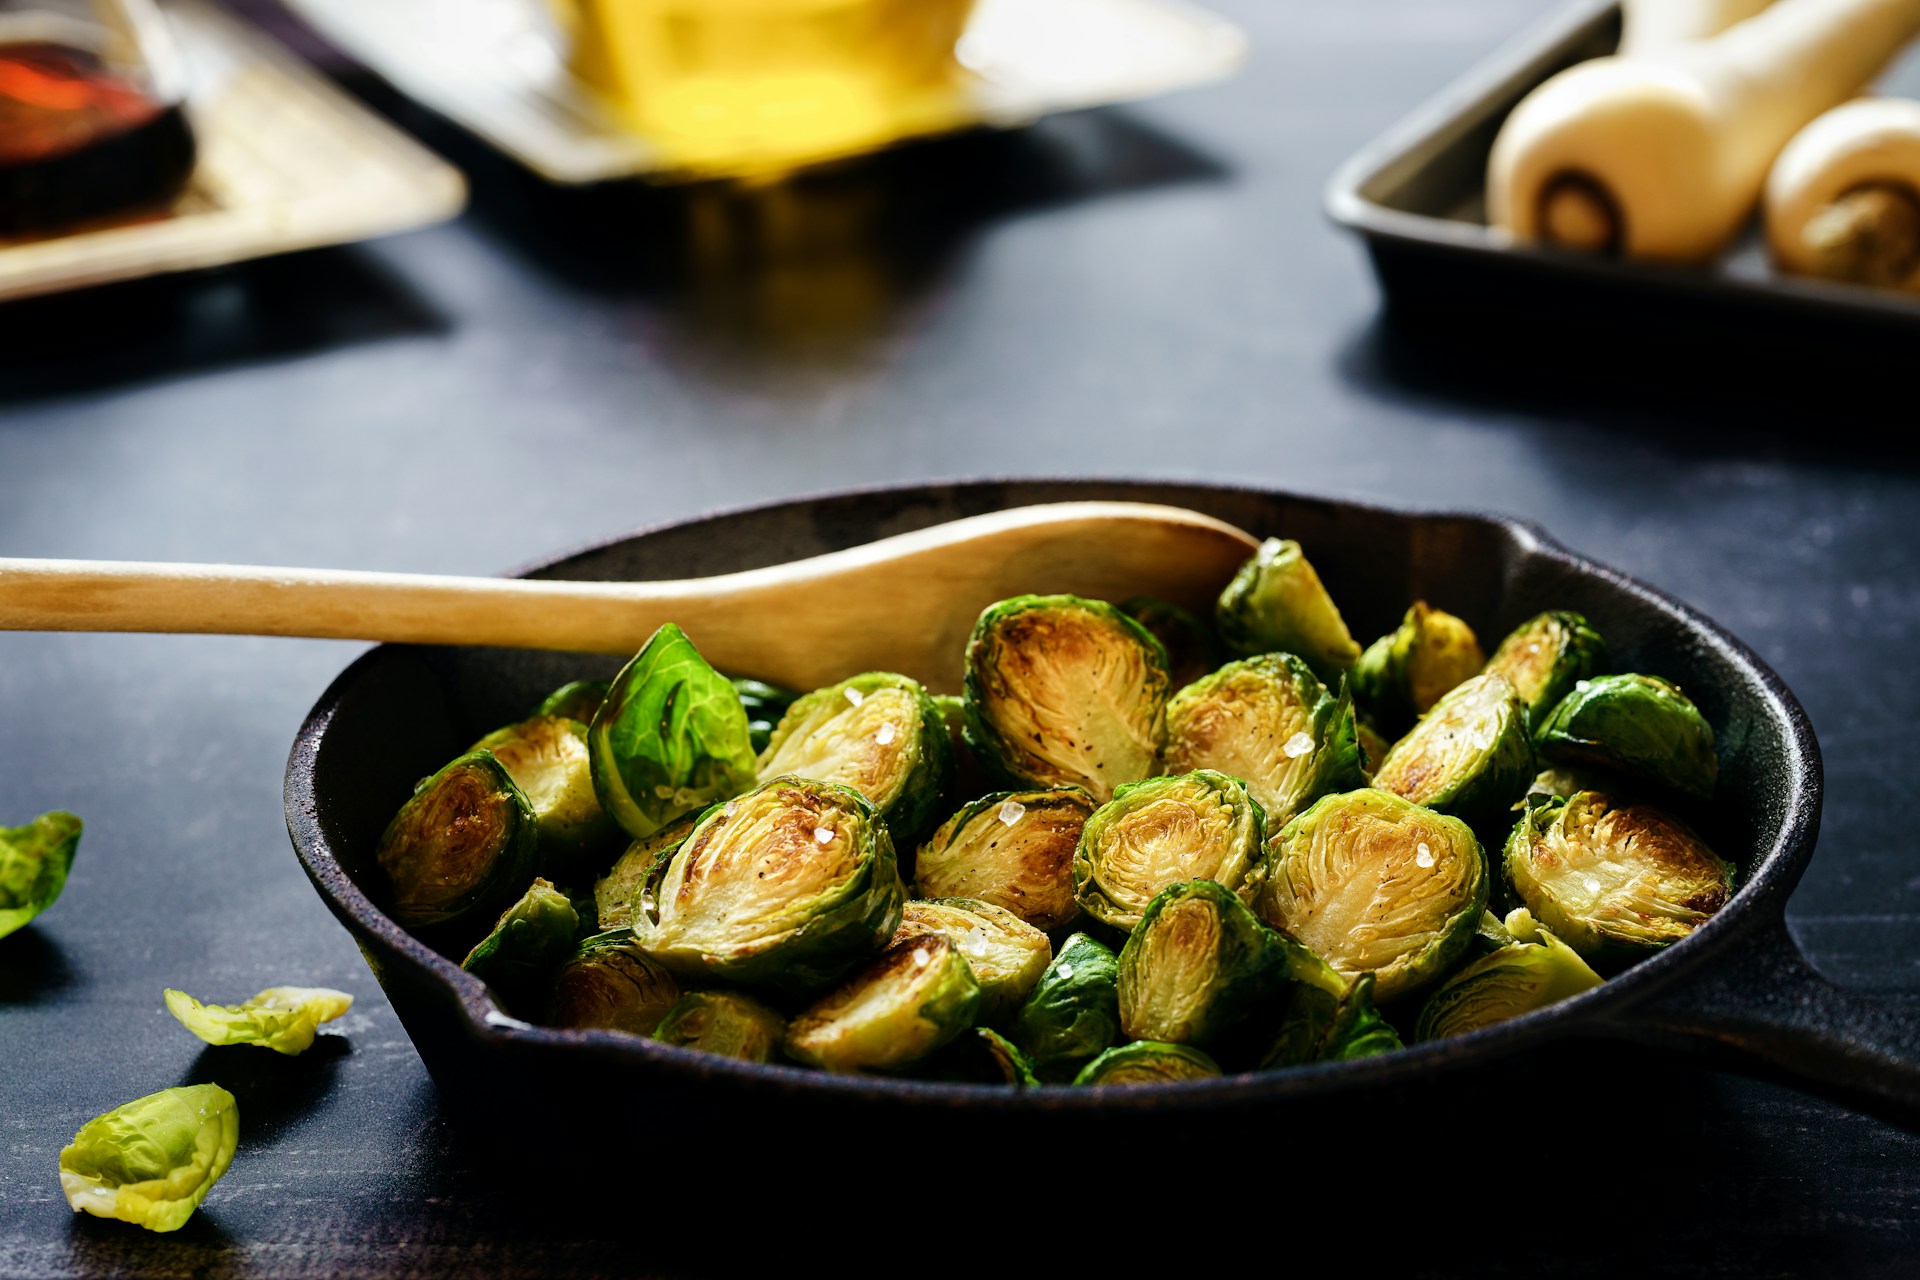 A plate of cooked brussel sprouts in a cast iron pan